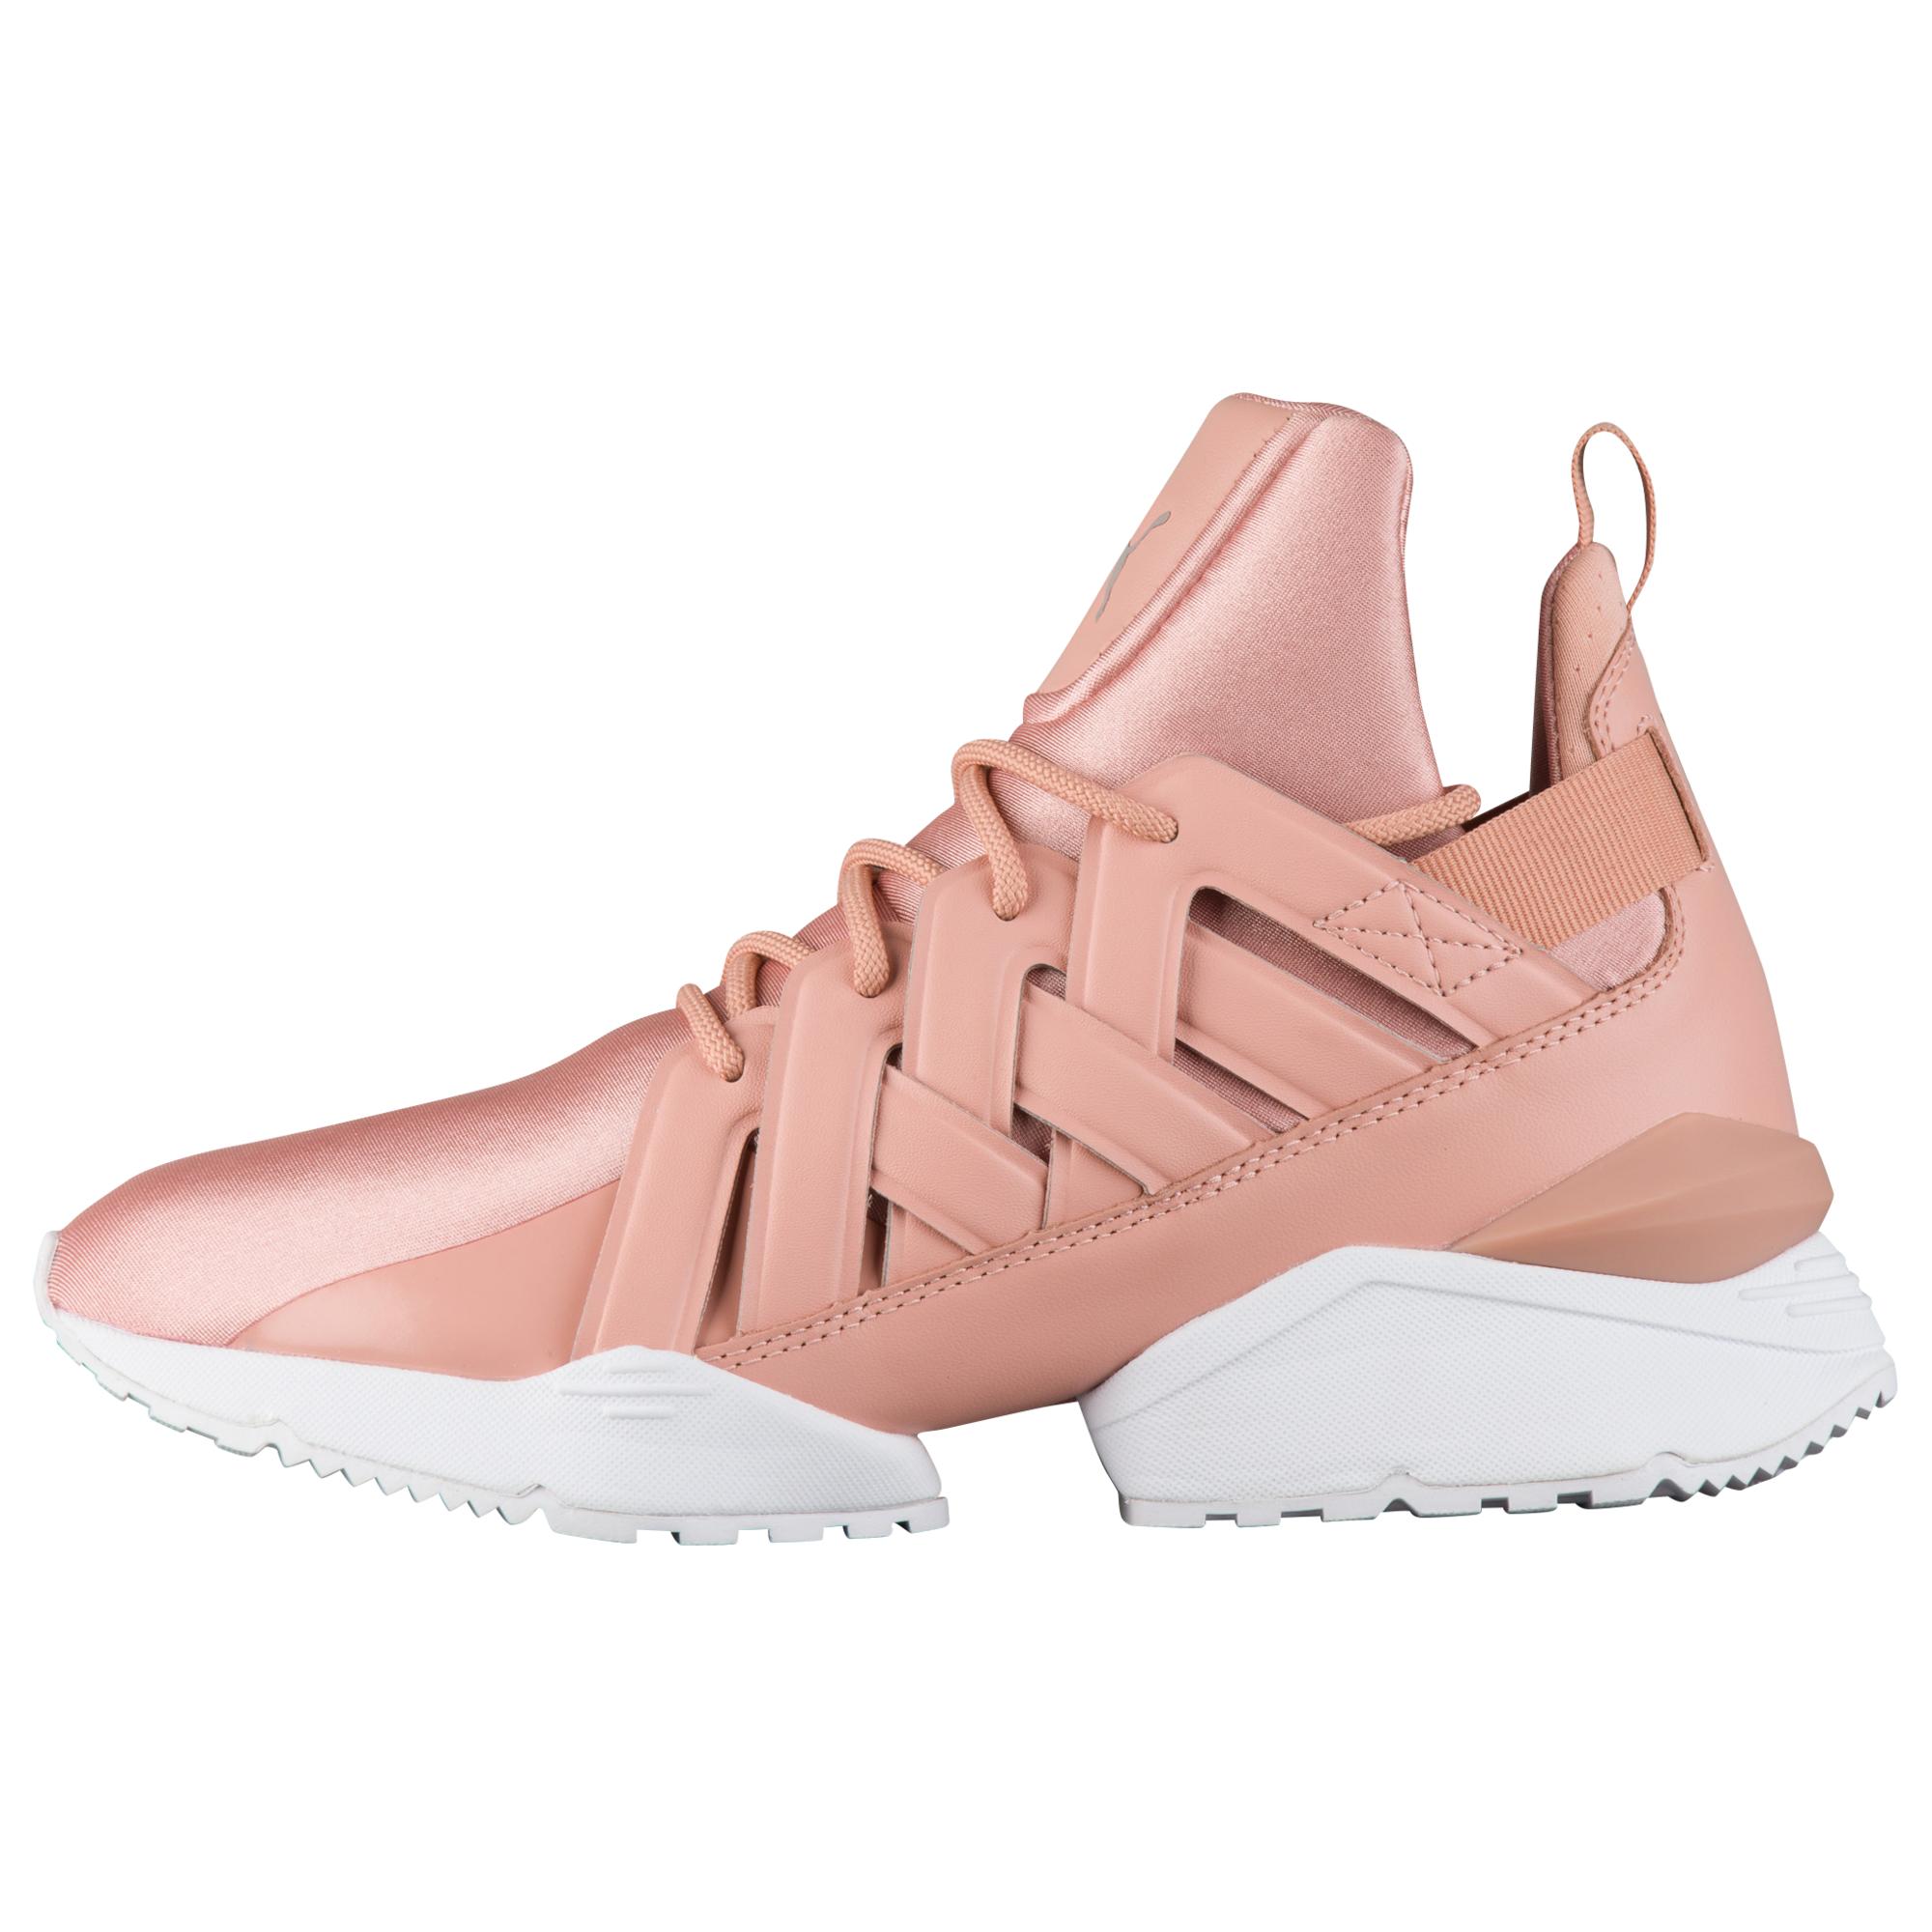 PUMA Muse Echo Satin Ep Sneakers in Peach Beige/White (Pink) - Lyst